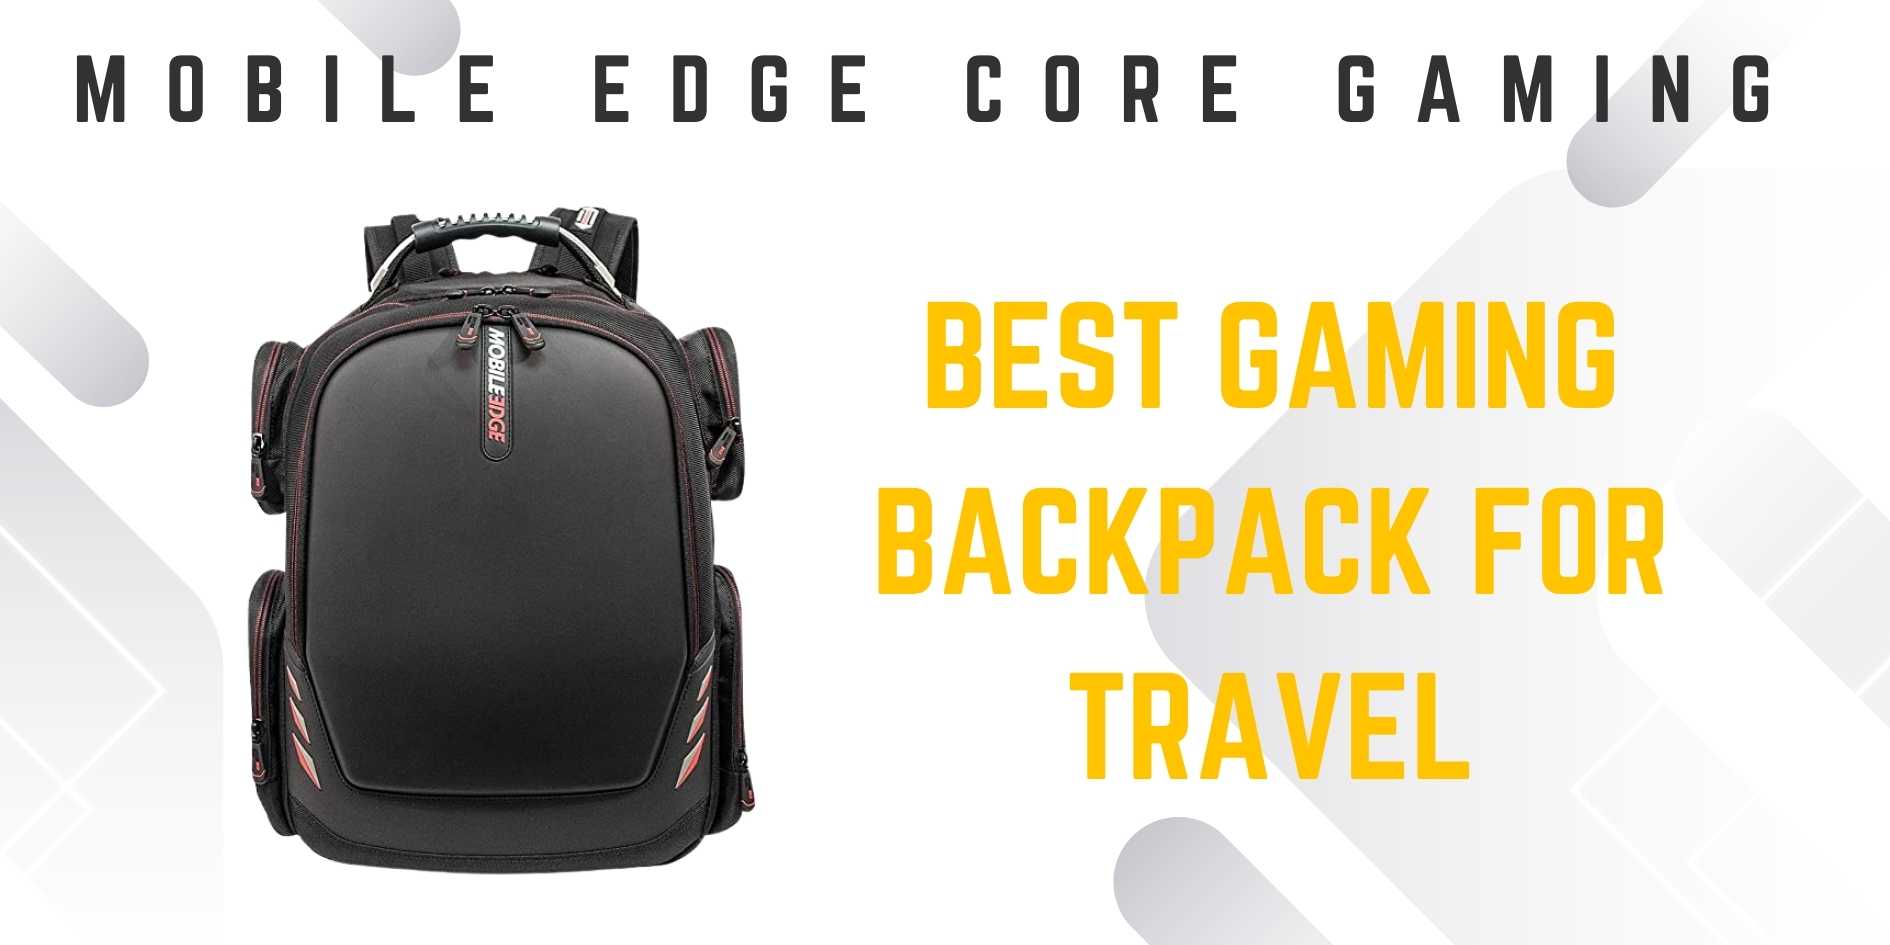 Mobile Edge Core Gaming Laptop Backpack